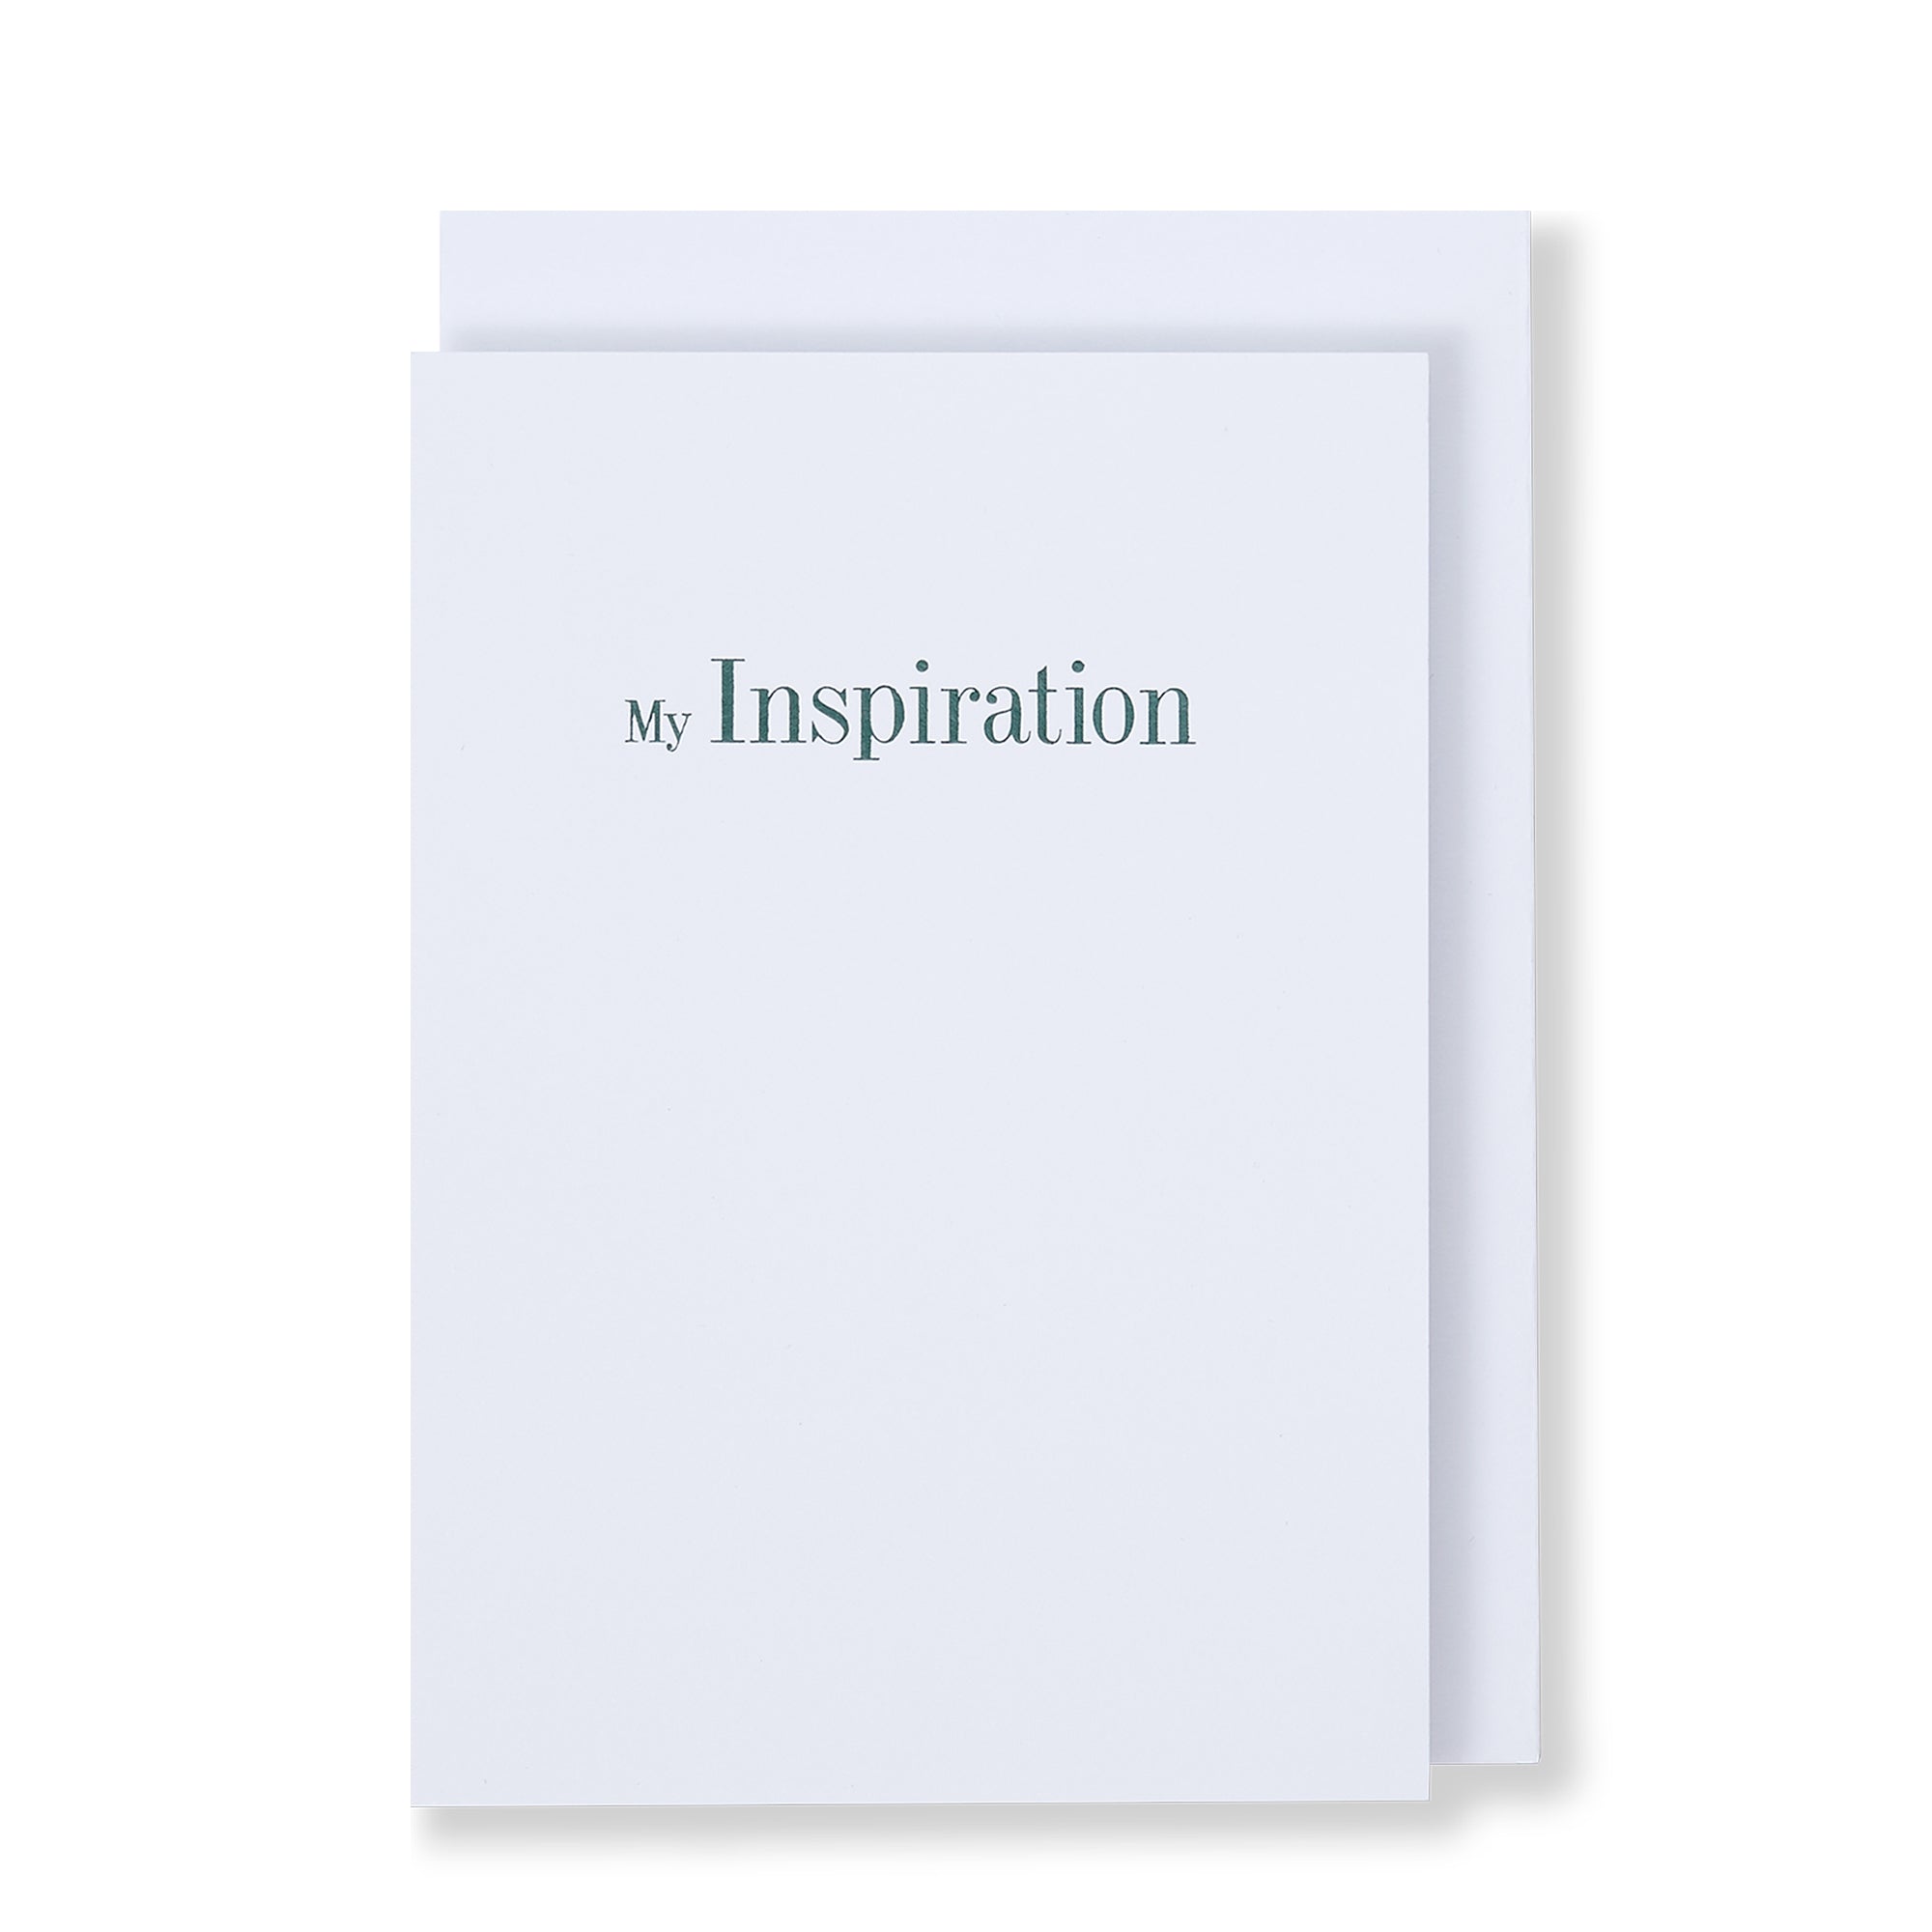 My Inspiration Greeting Card in White, Front